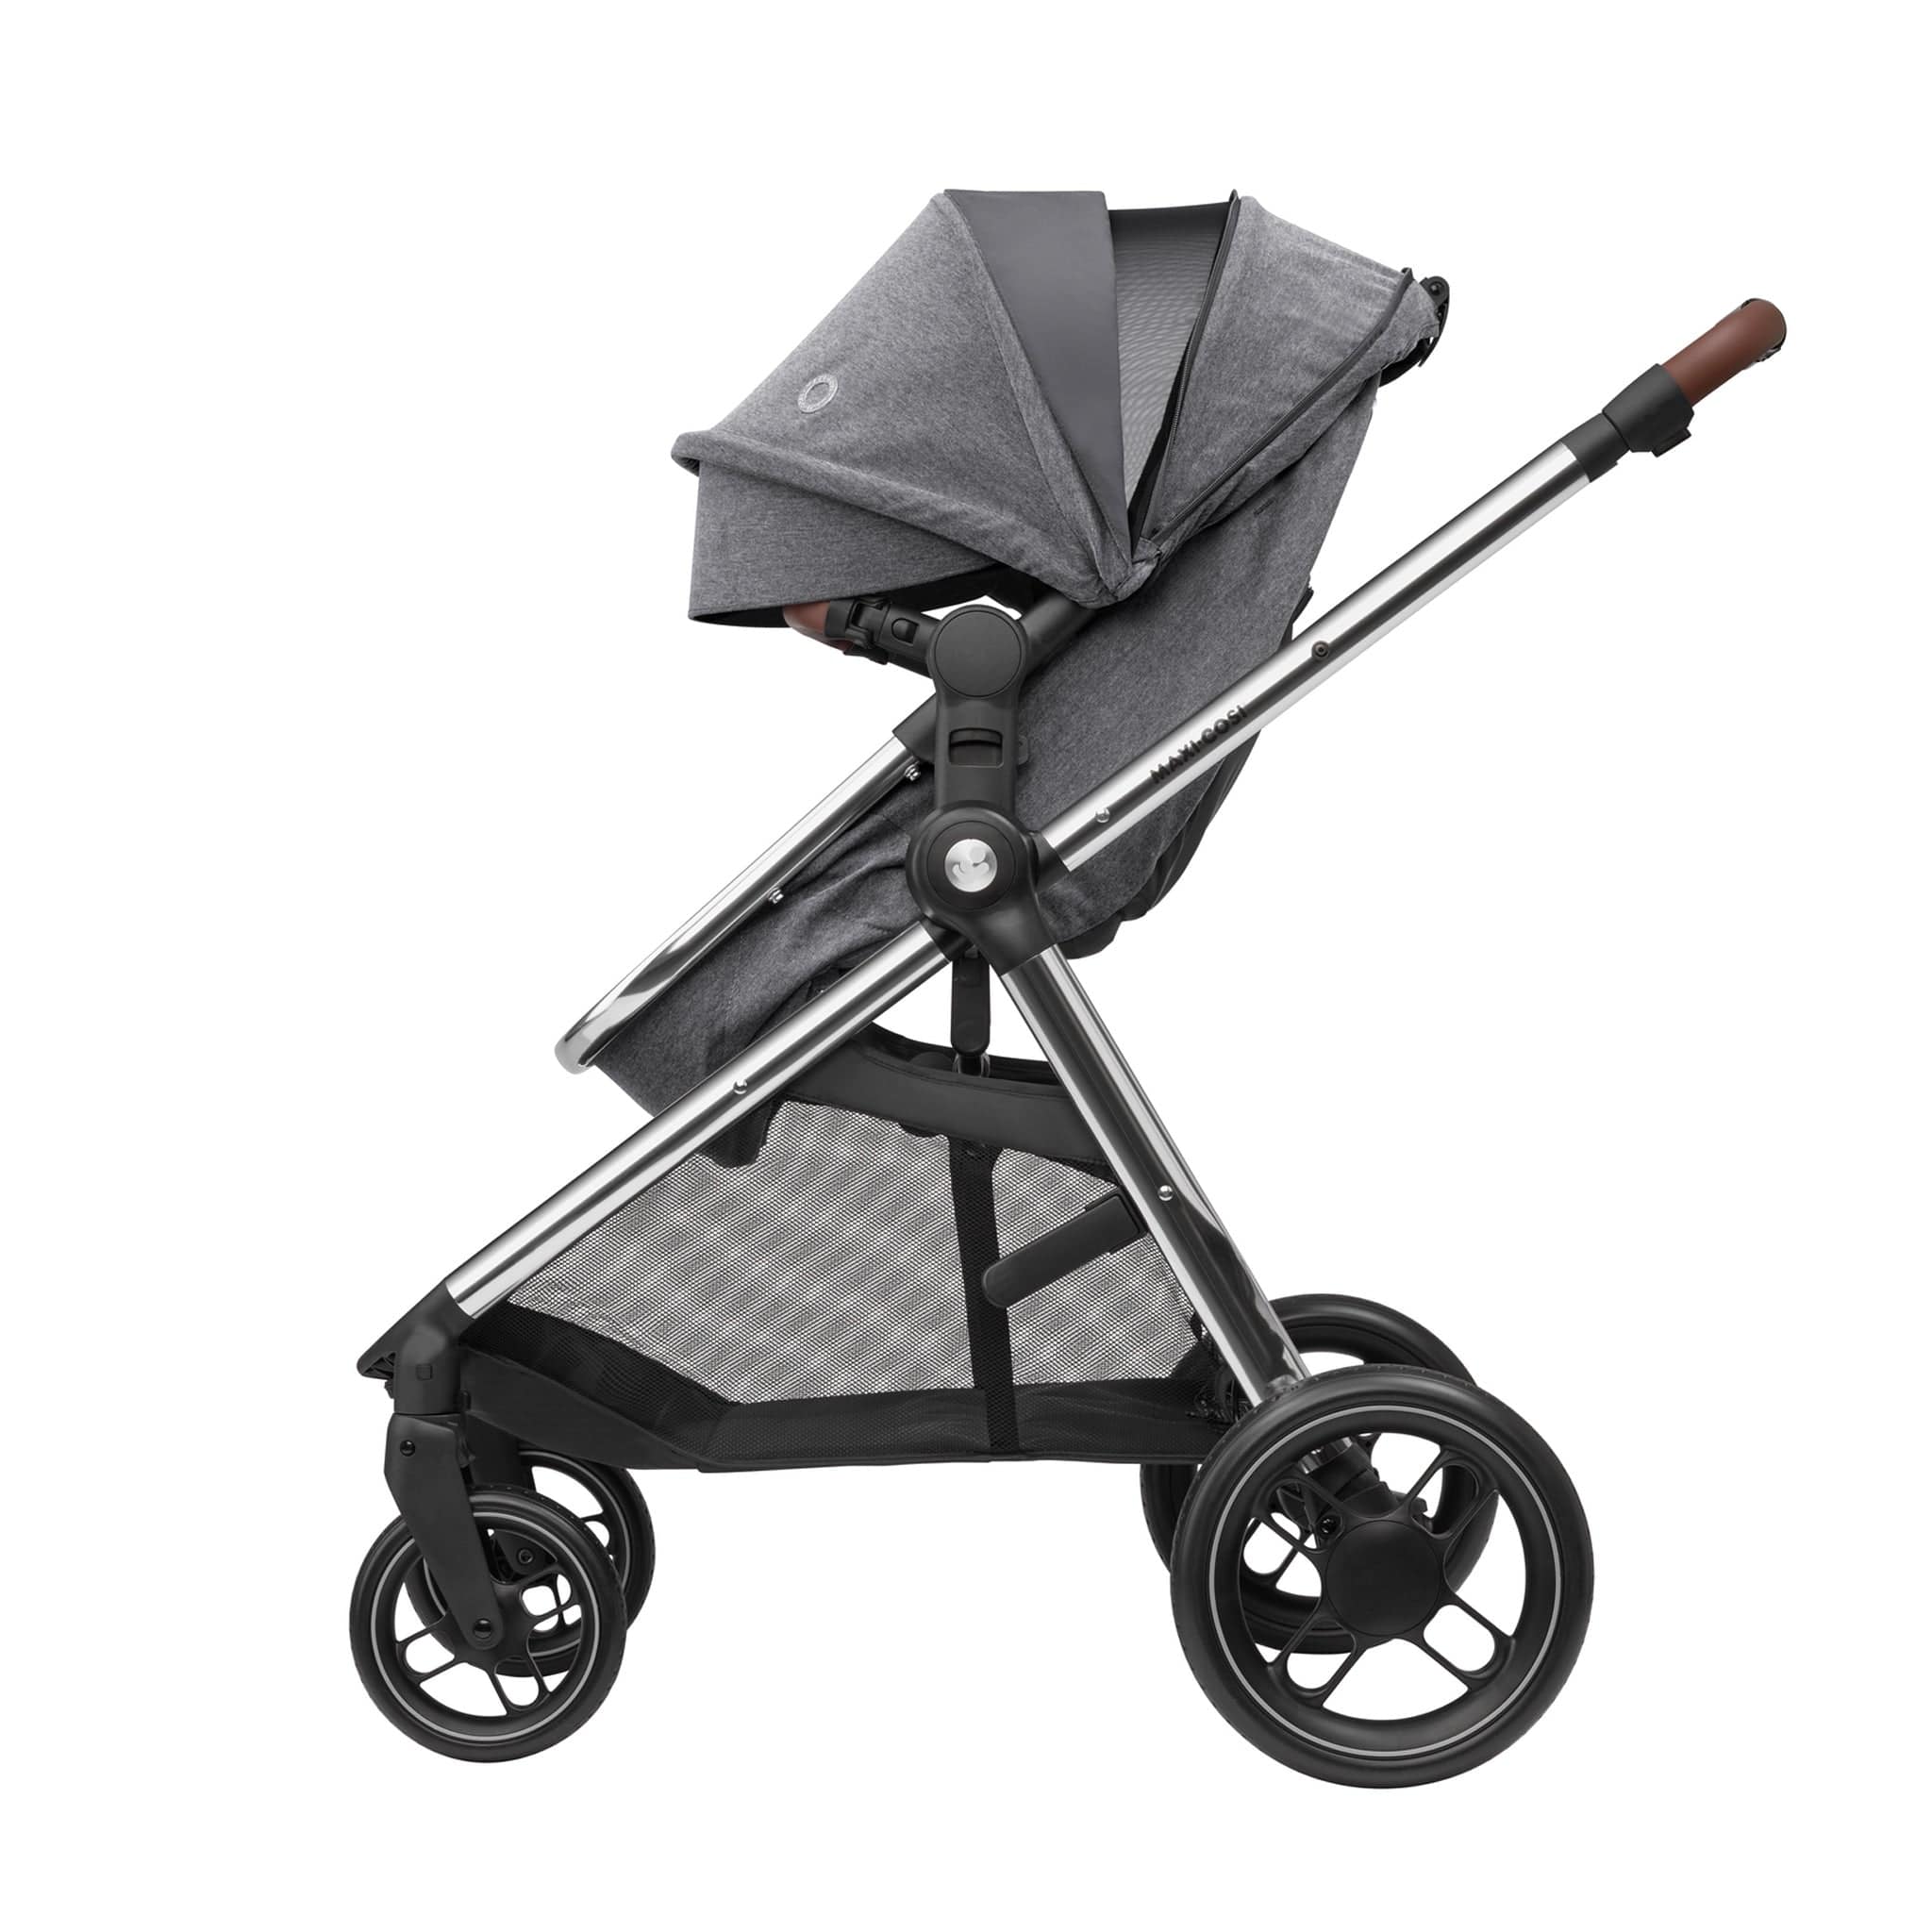 Maxi-Cosi travel systems Maxi-Cosi Zelia Luxe with Cabriofix i-Size & Base Travel System in Twillic Grey 11072-TWI-GRY